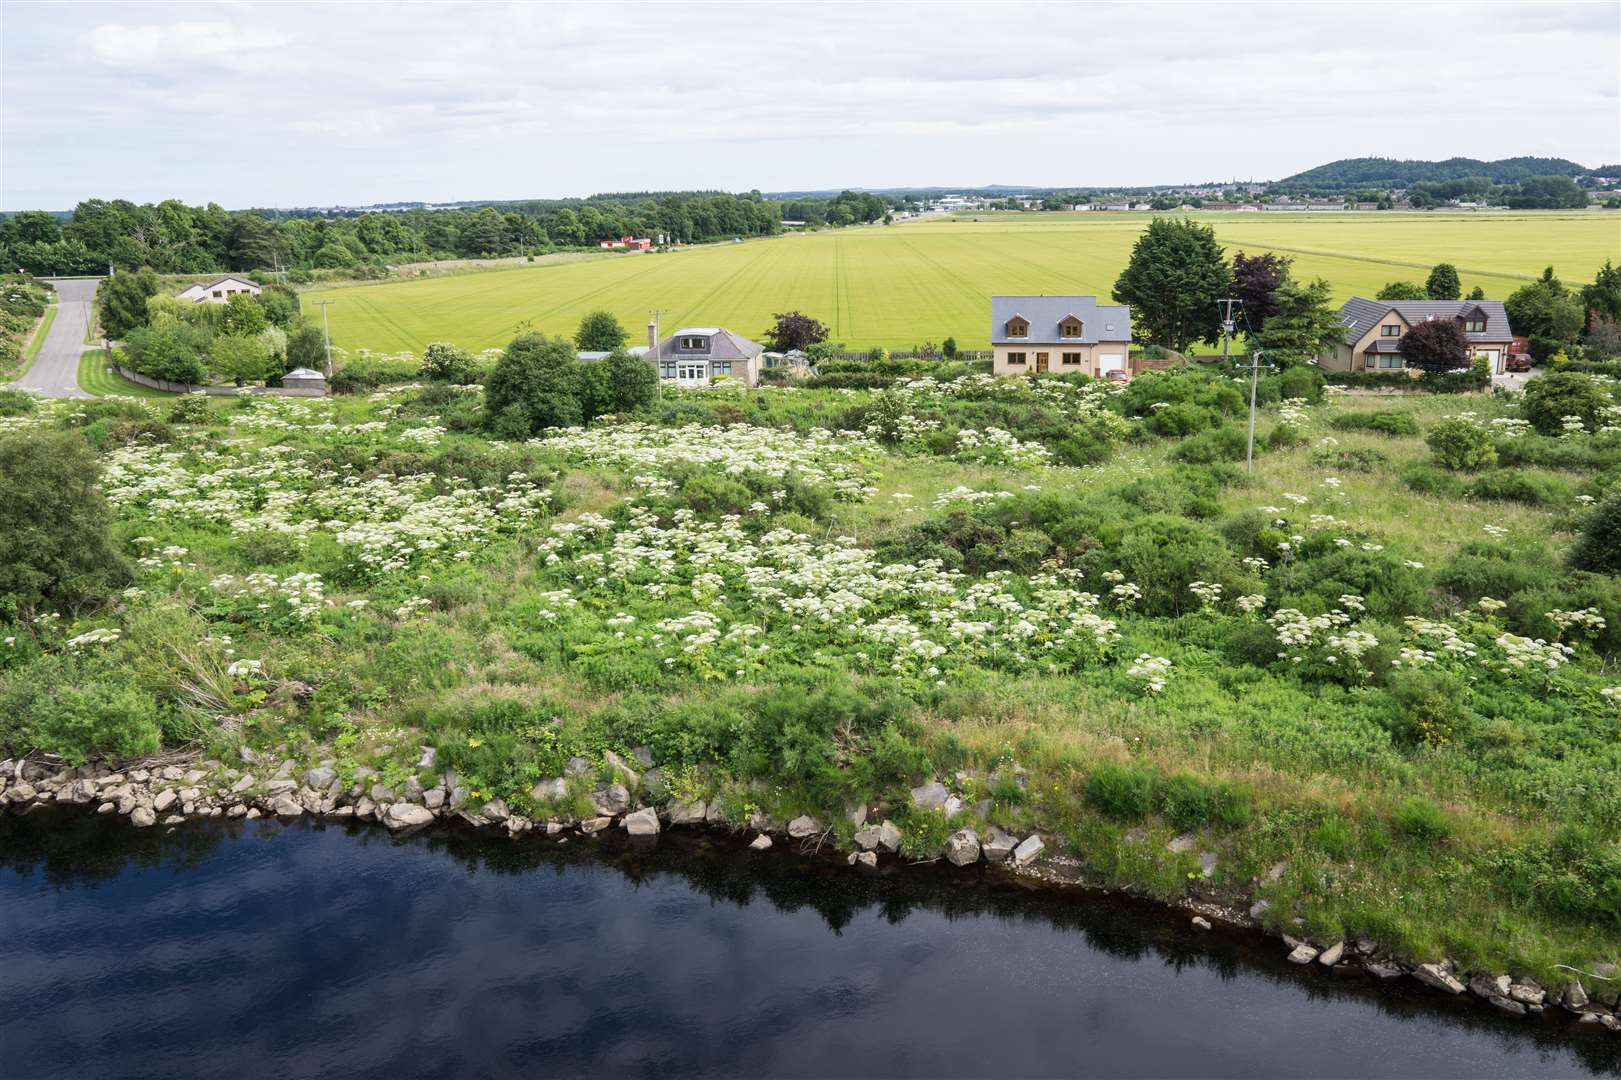 Giant Hogweed at the Mundole Stoney Pool on the River Findhorn in July 2015.